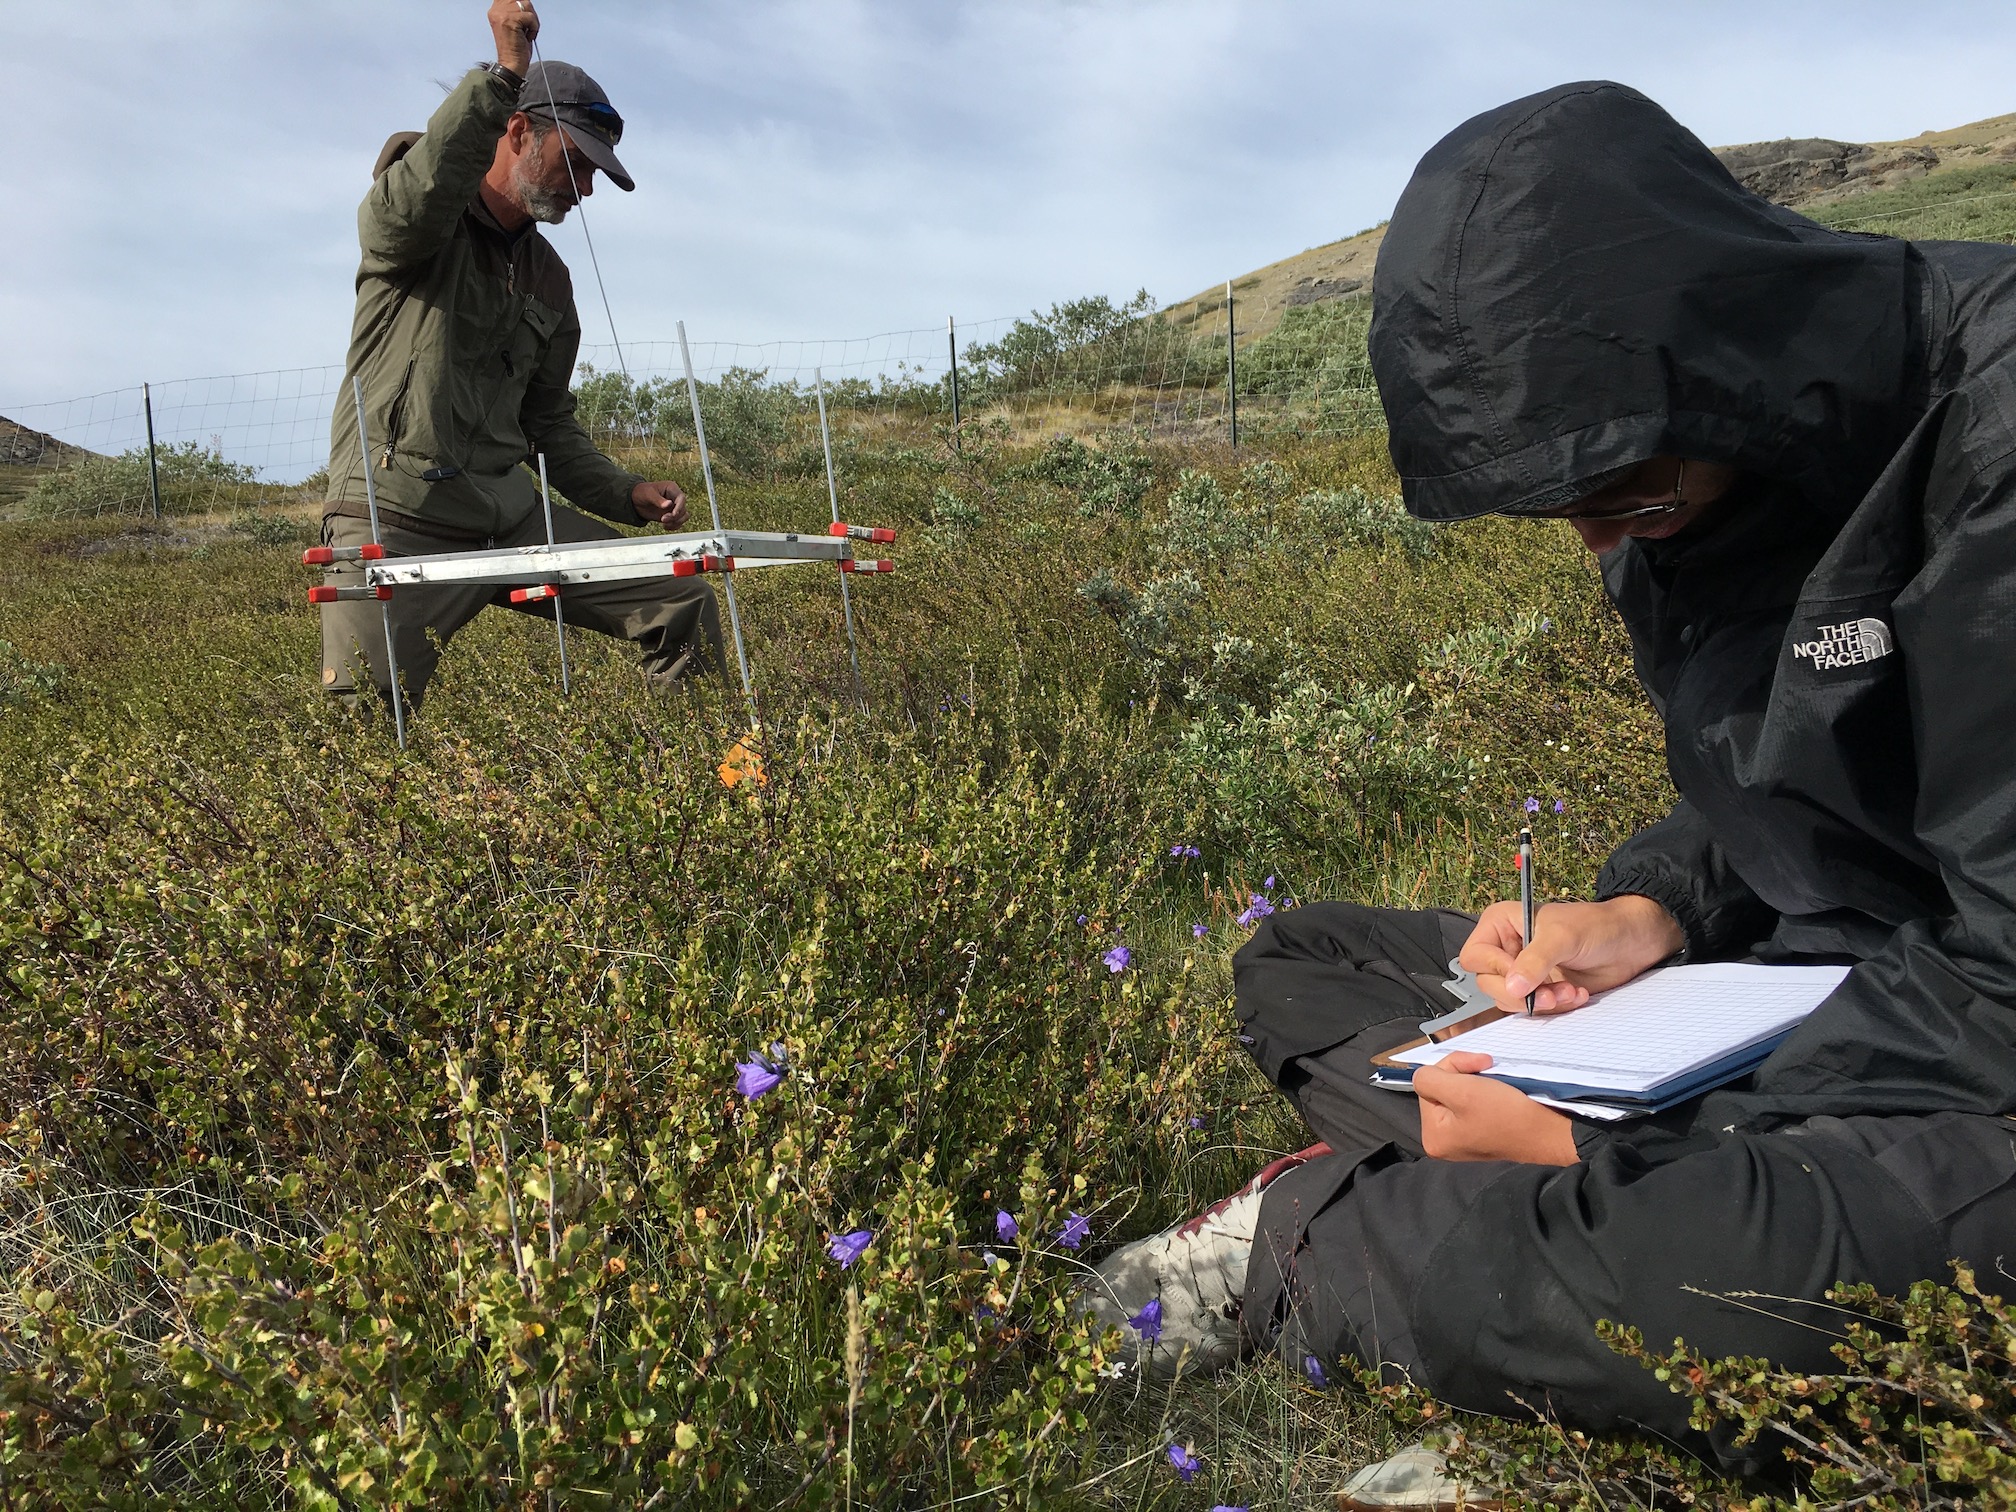 Two scientists conduct field work in Arctic Greenland tundra, one person seated with notebook and theother standing with science instrument